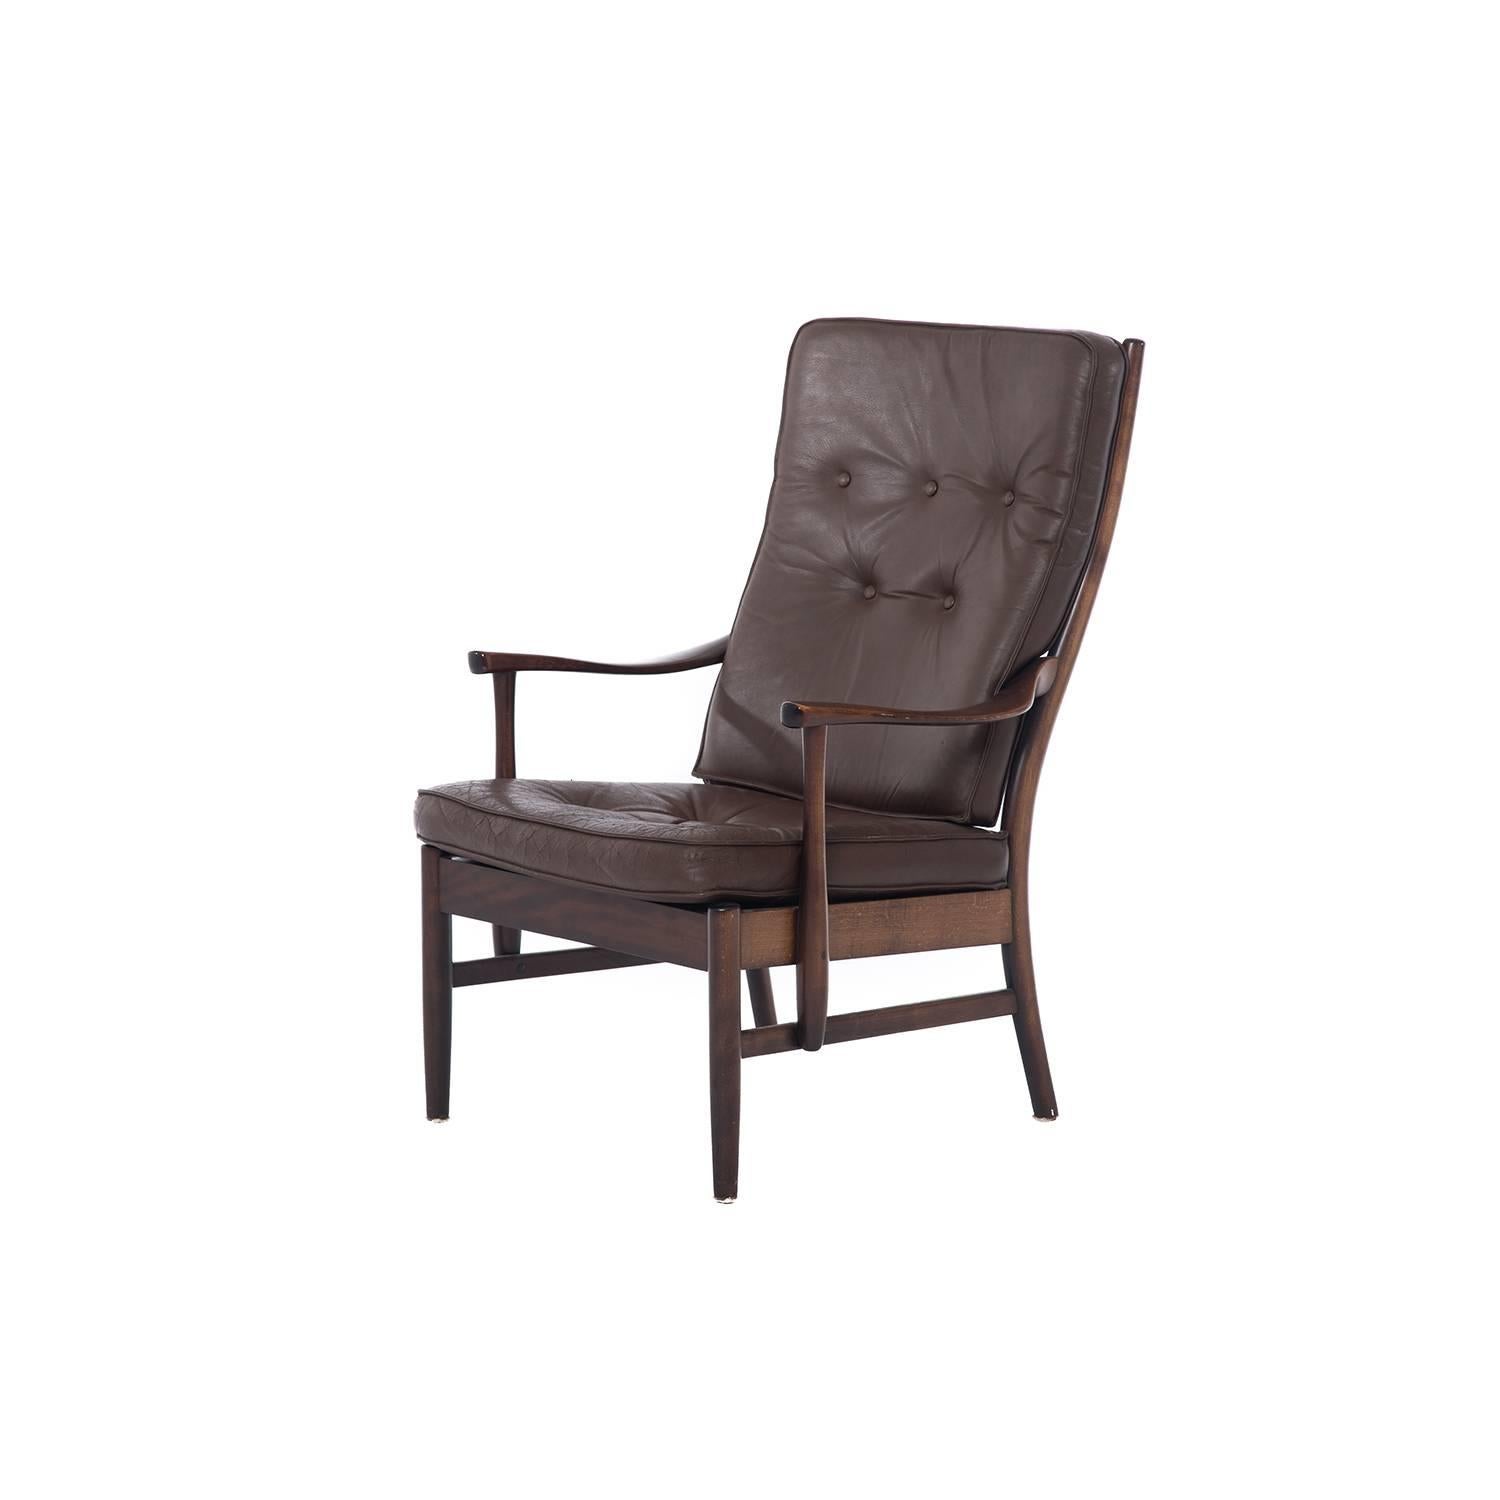 This lacquered beech high back lounge is in original leather upholstery.